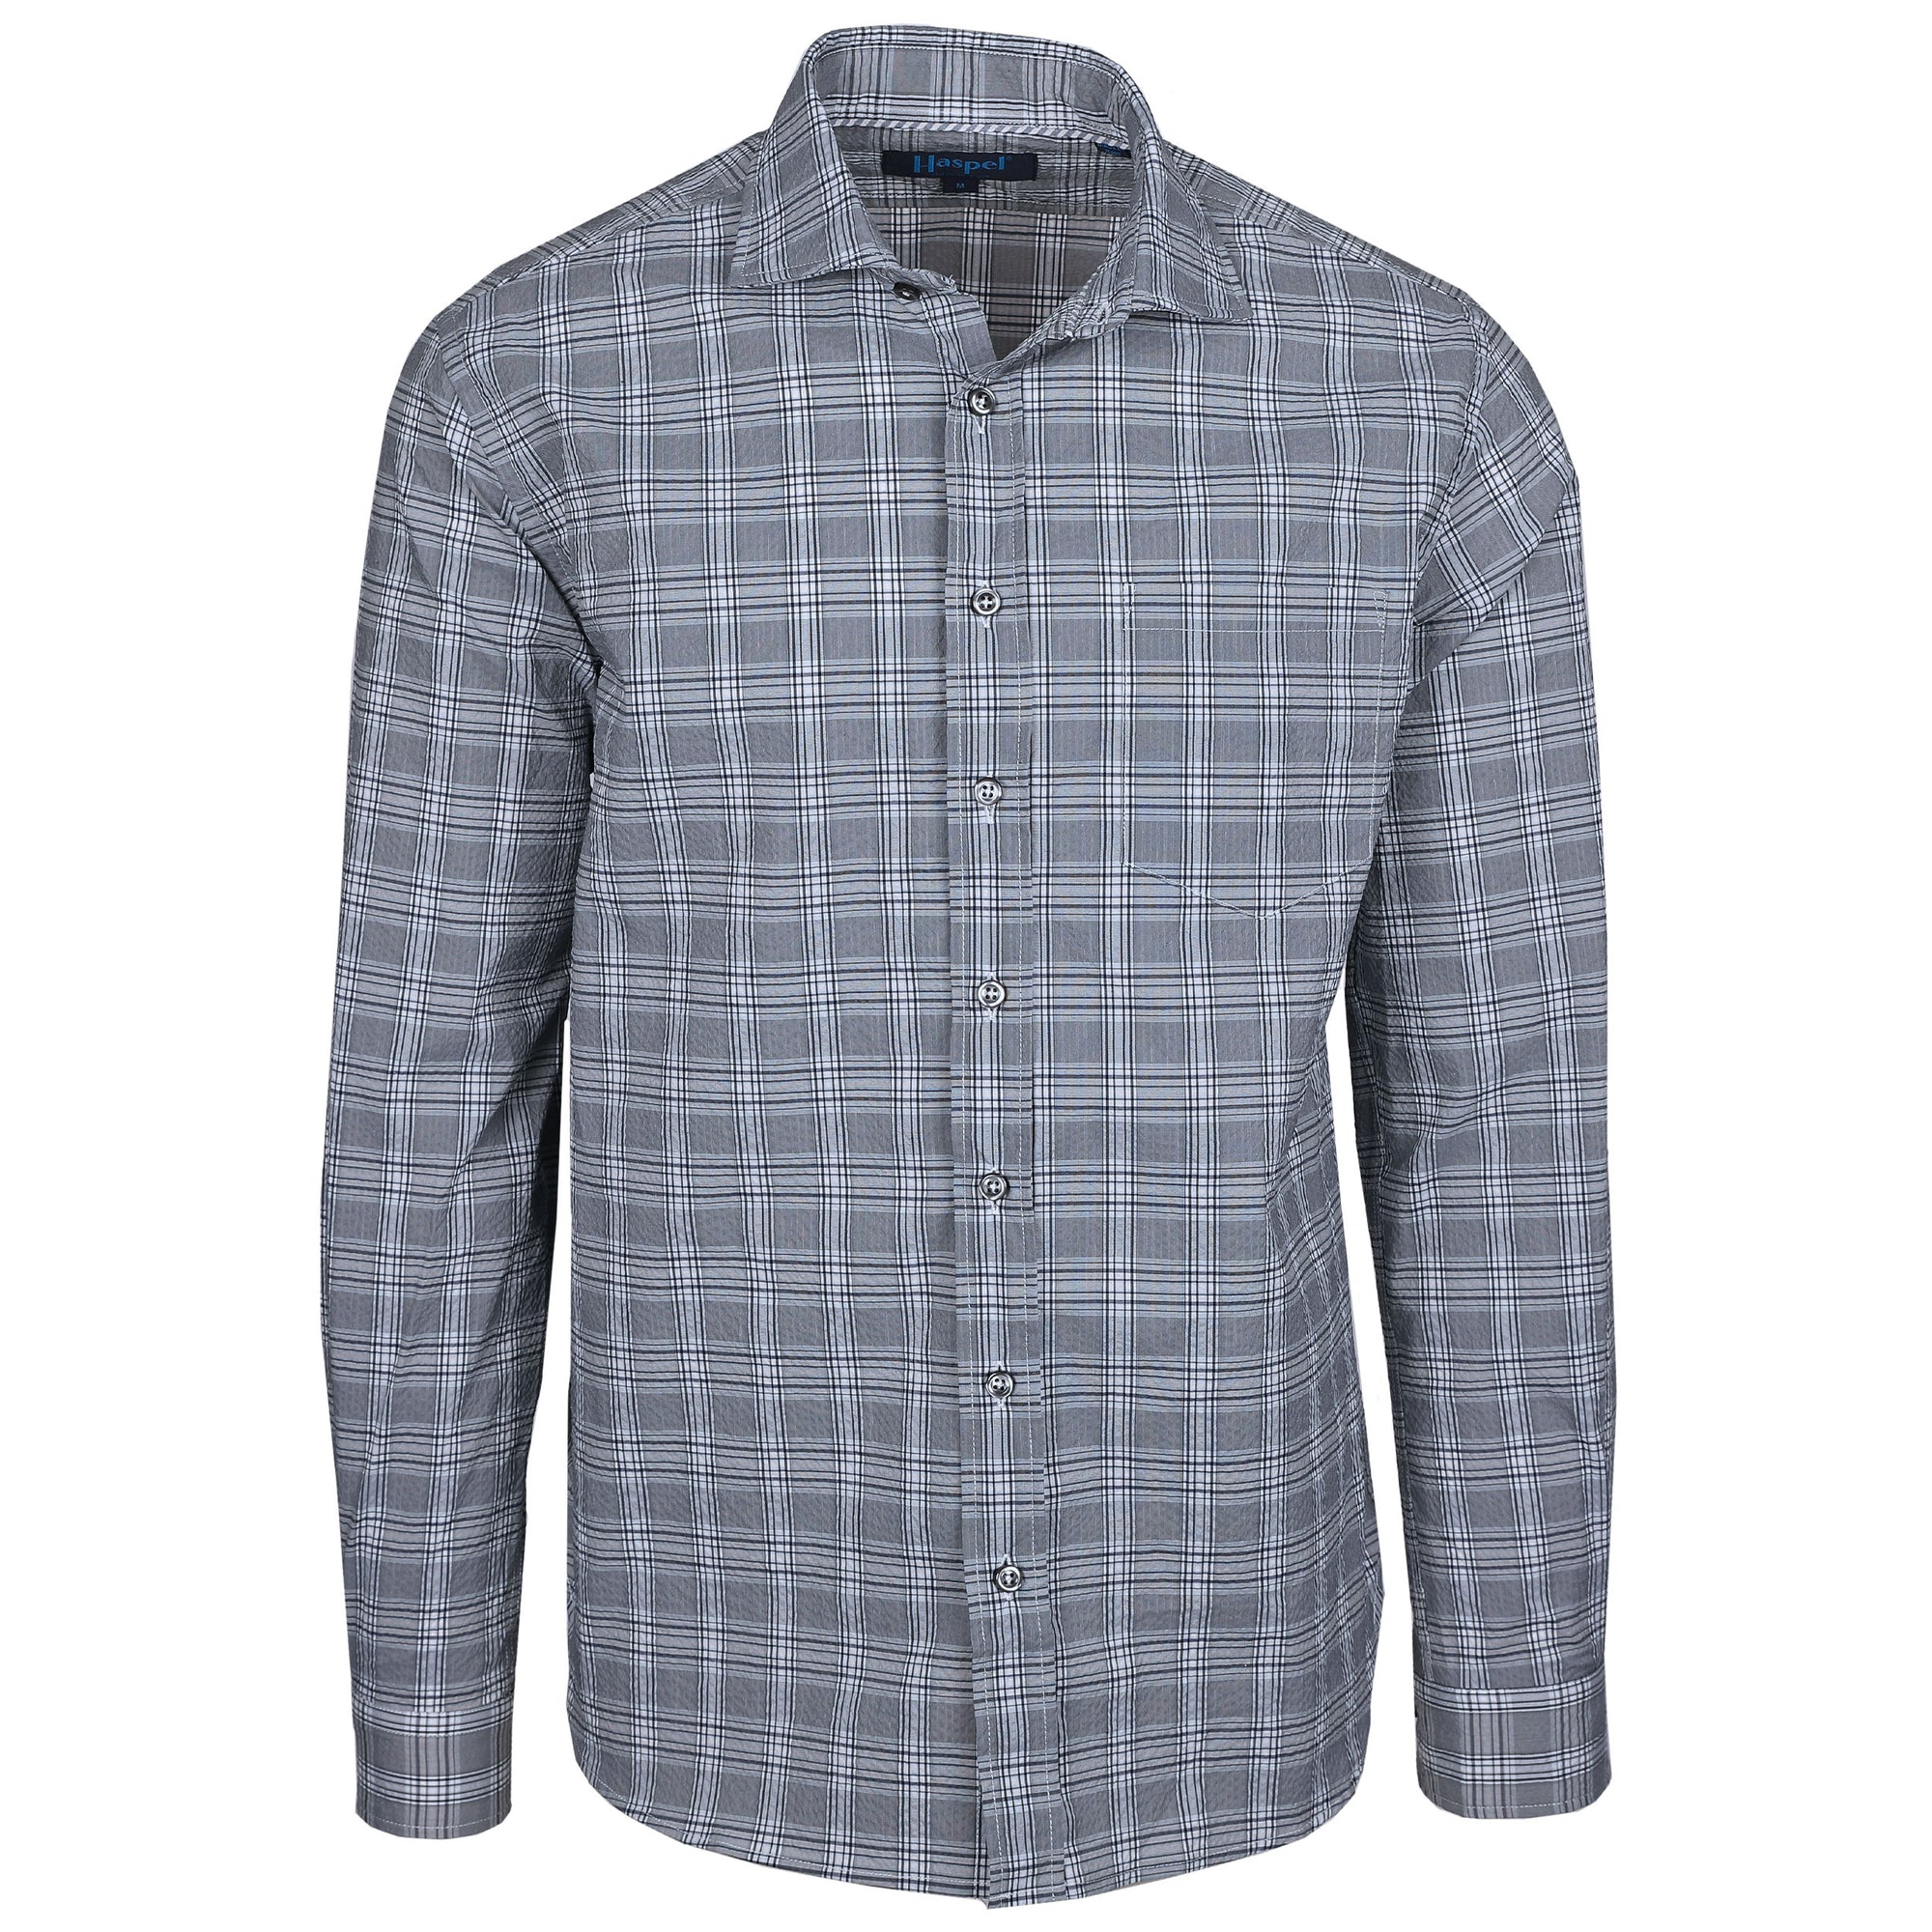 Update your wardrobe with this dapper Chartres Grey Seersucker Glenplaid Check. This suave fabric features a classy grey glenplaid check, perfect for a sharp man-about-town look. Feel like a true gentleman, whatever the occasion.  100% Cotton • Spread Collar with Removable Collar Stays • Long Sleeve • Chest Pocket • Machine Washable • Made in Italy • Return Policy